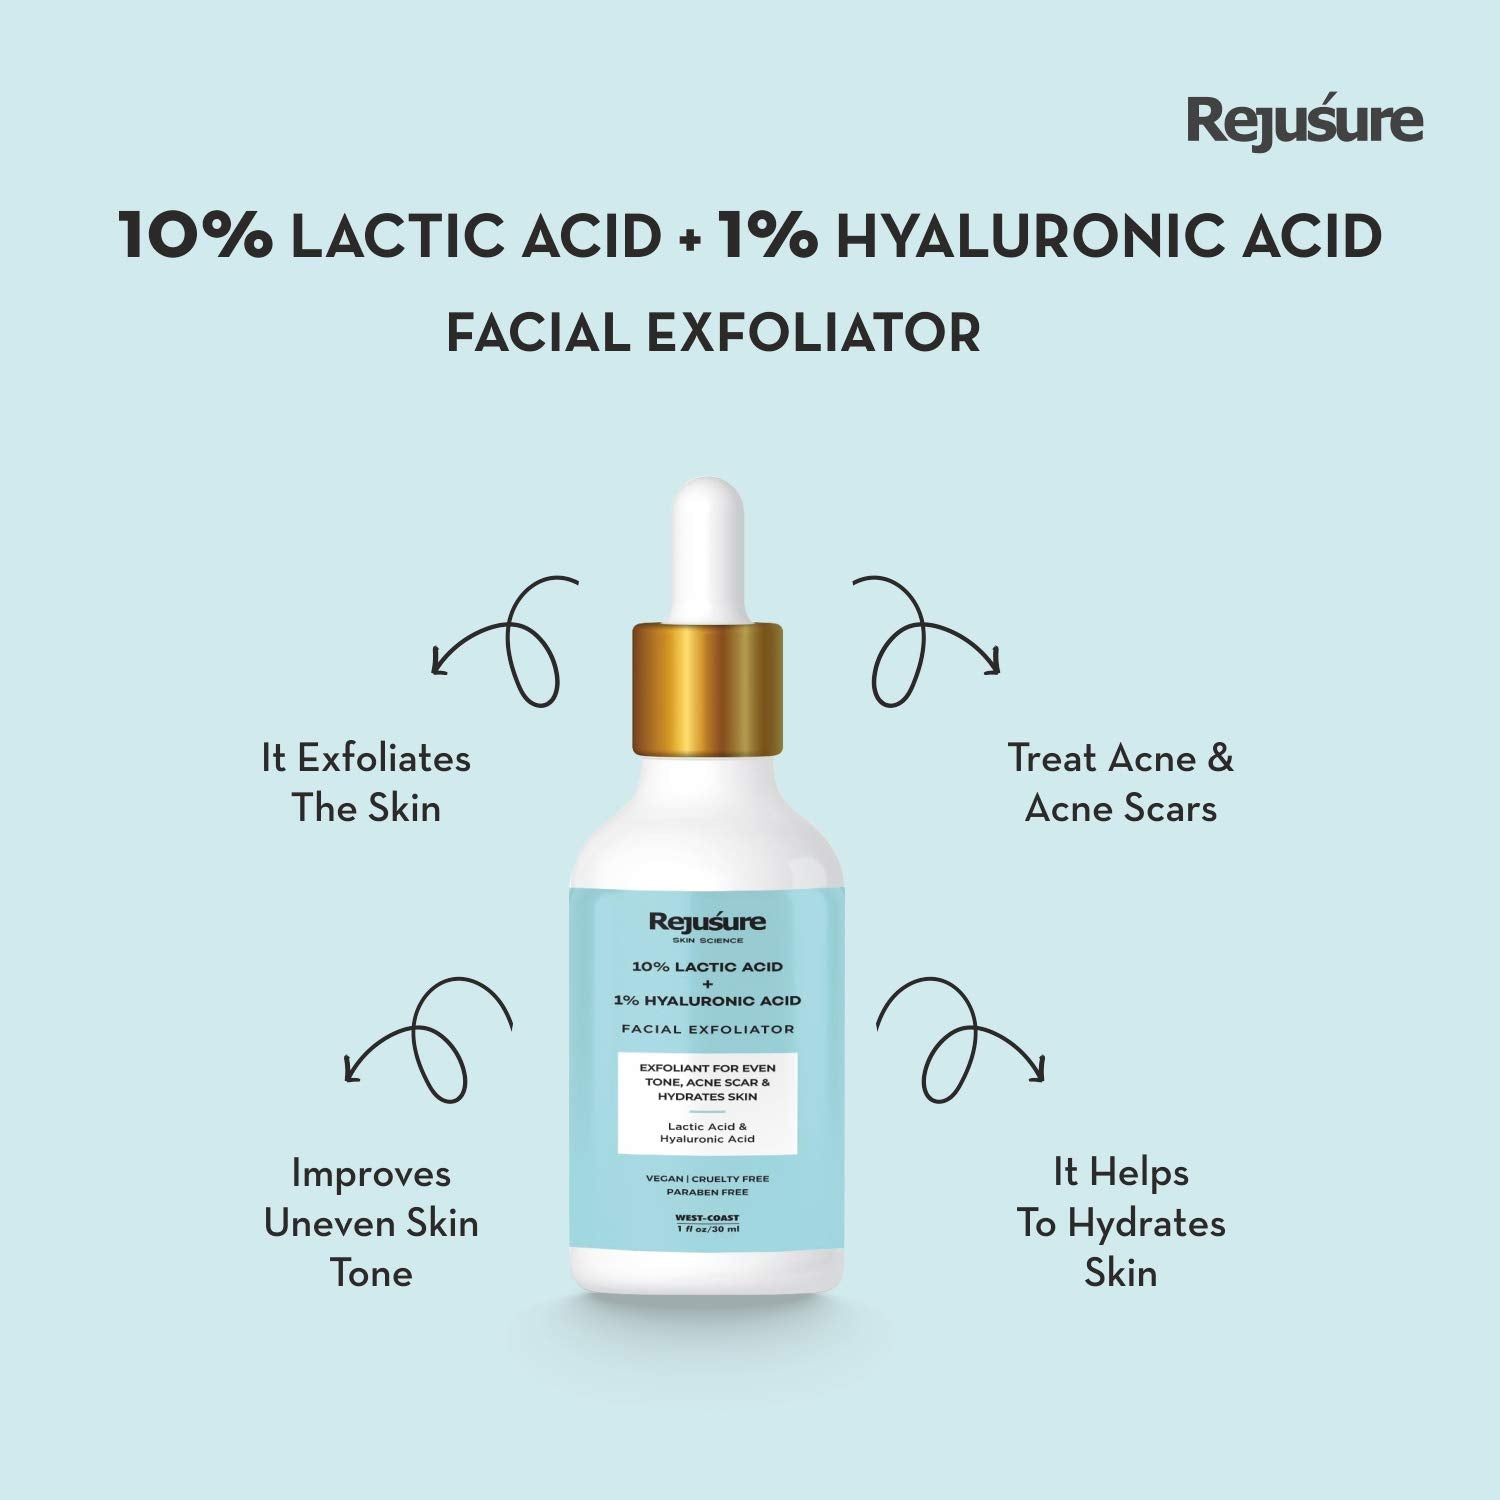 Rejusure Lactic Acid 10% + Hyaluronic Acid 1% Facial Exfoliator Exfoliant for Even Tone, Acne Scar & Hydrates Skin Best for Sensitive, Dry & Oily skin – 30ml (Pack of 5)